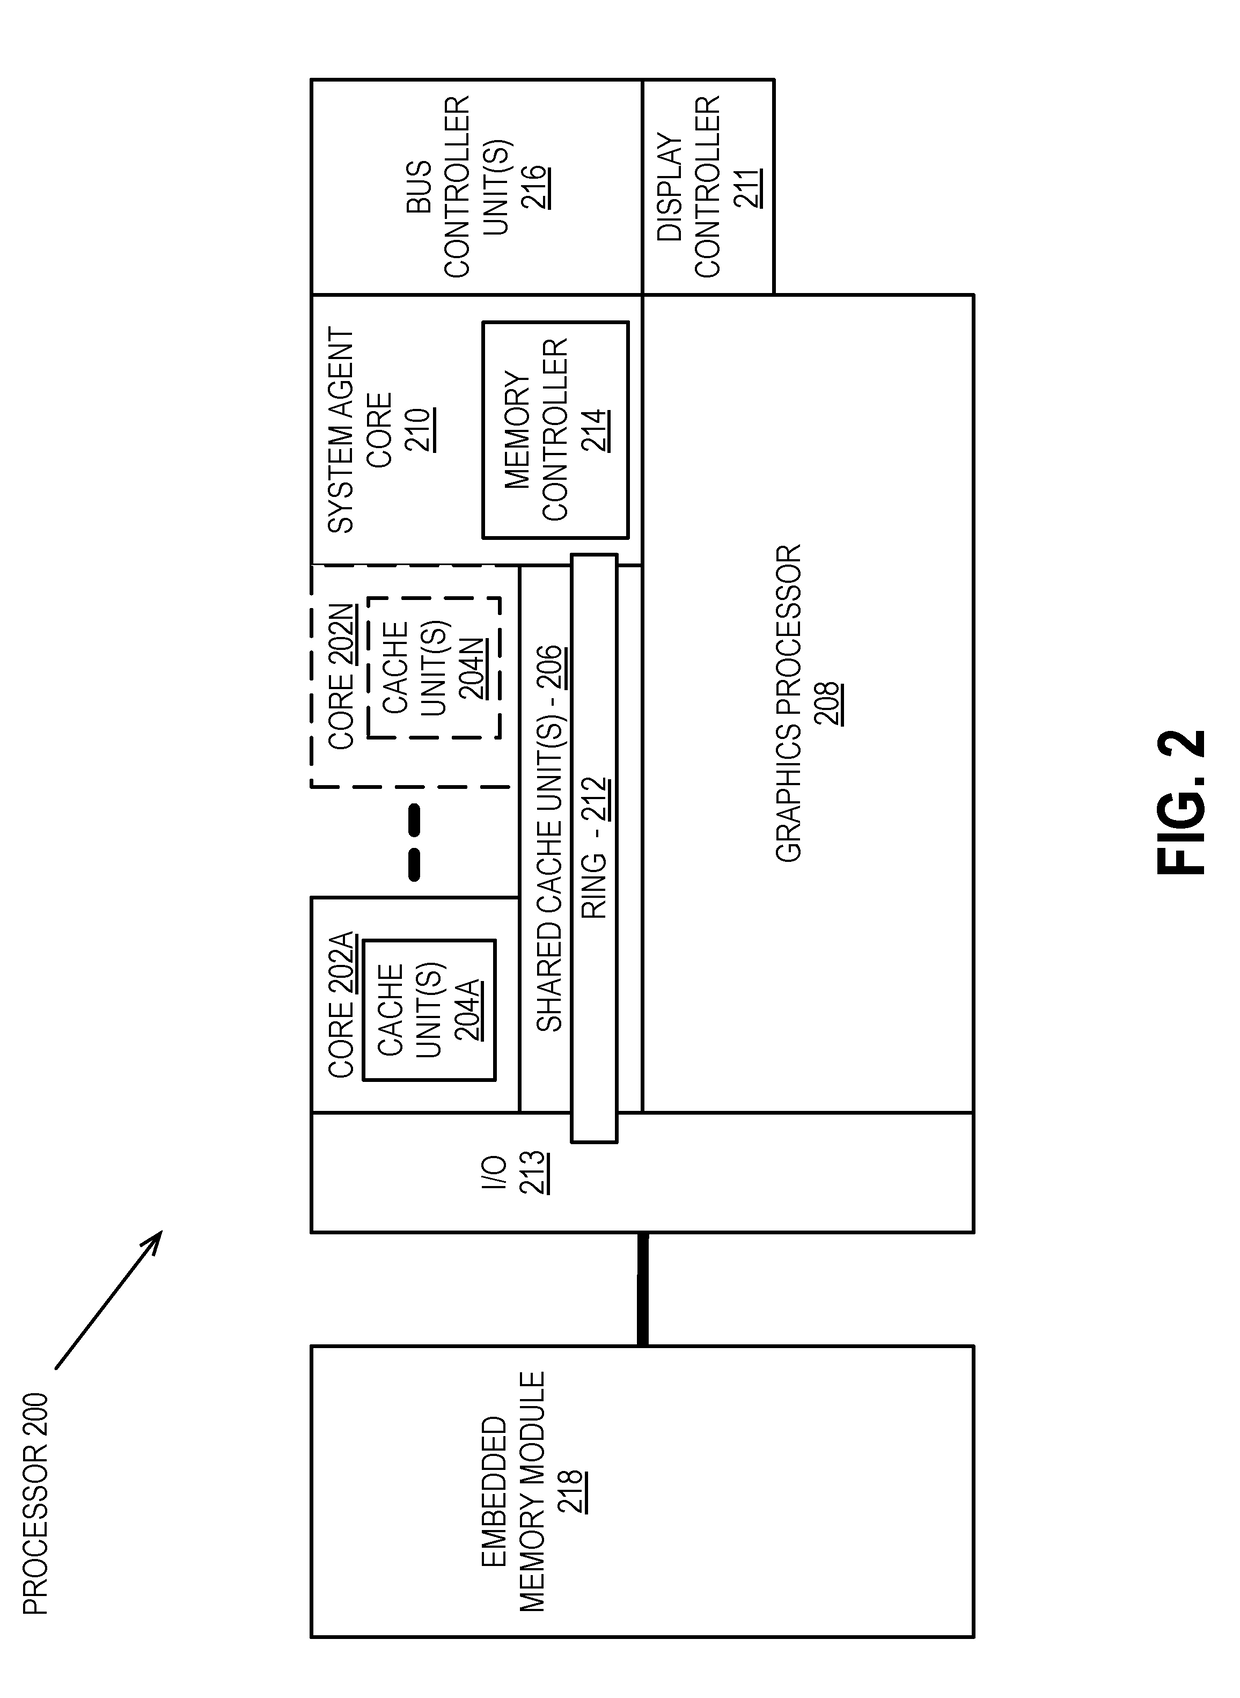 Ray tracing apparatus and method for memory access and register operations